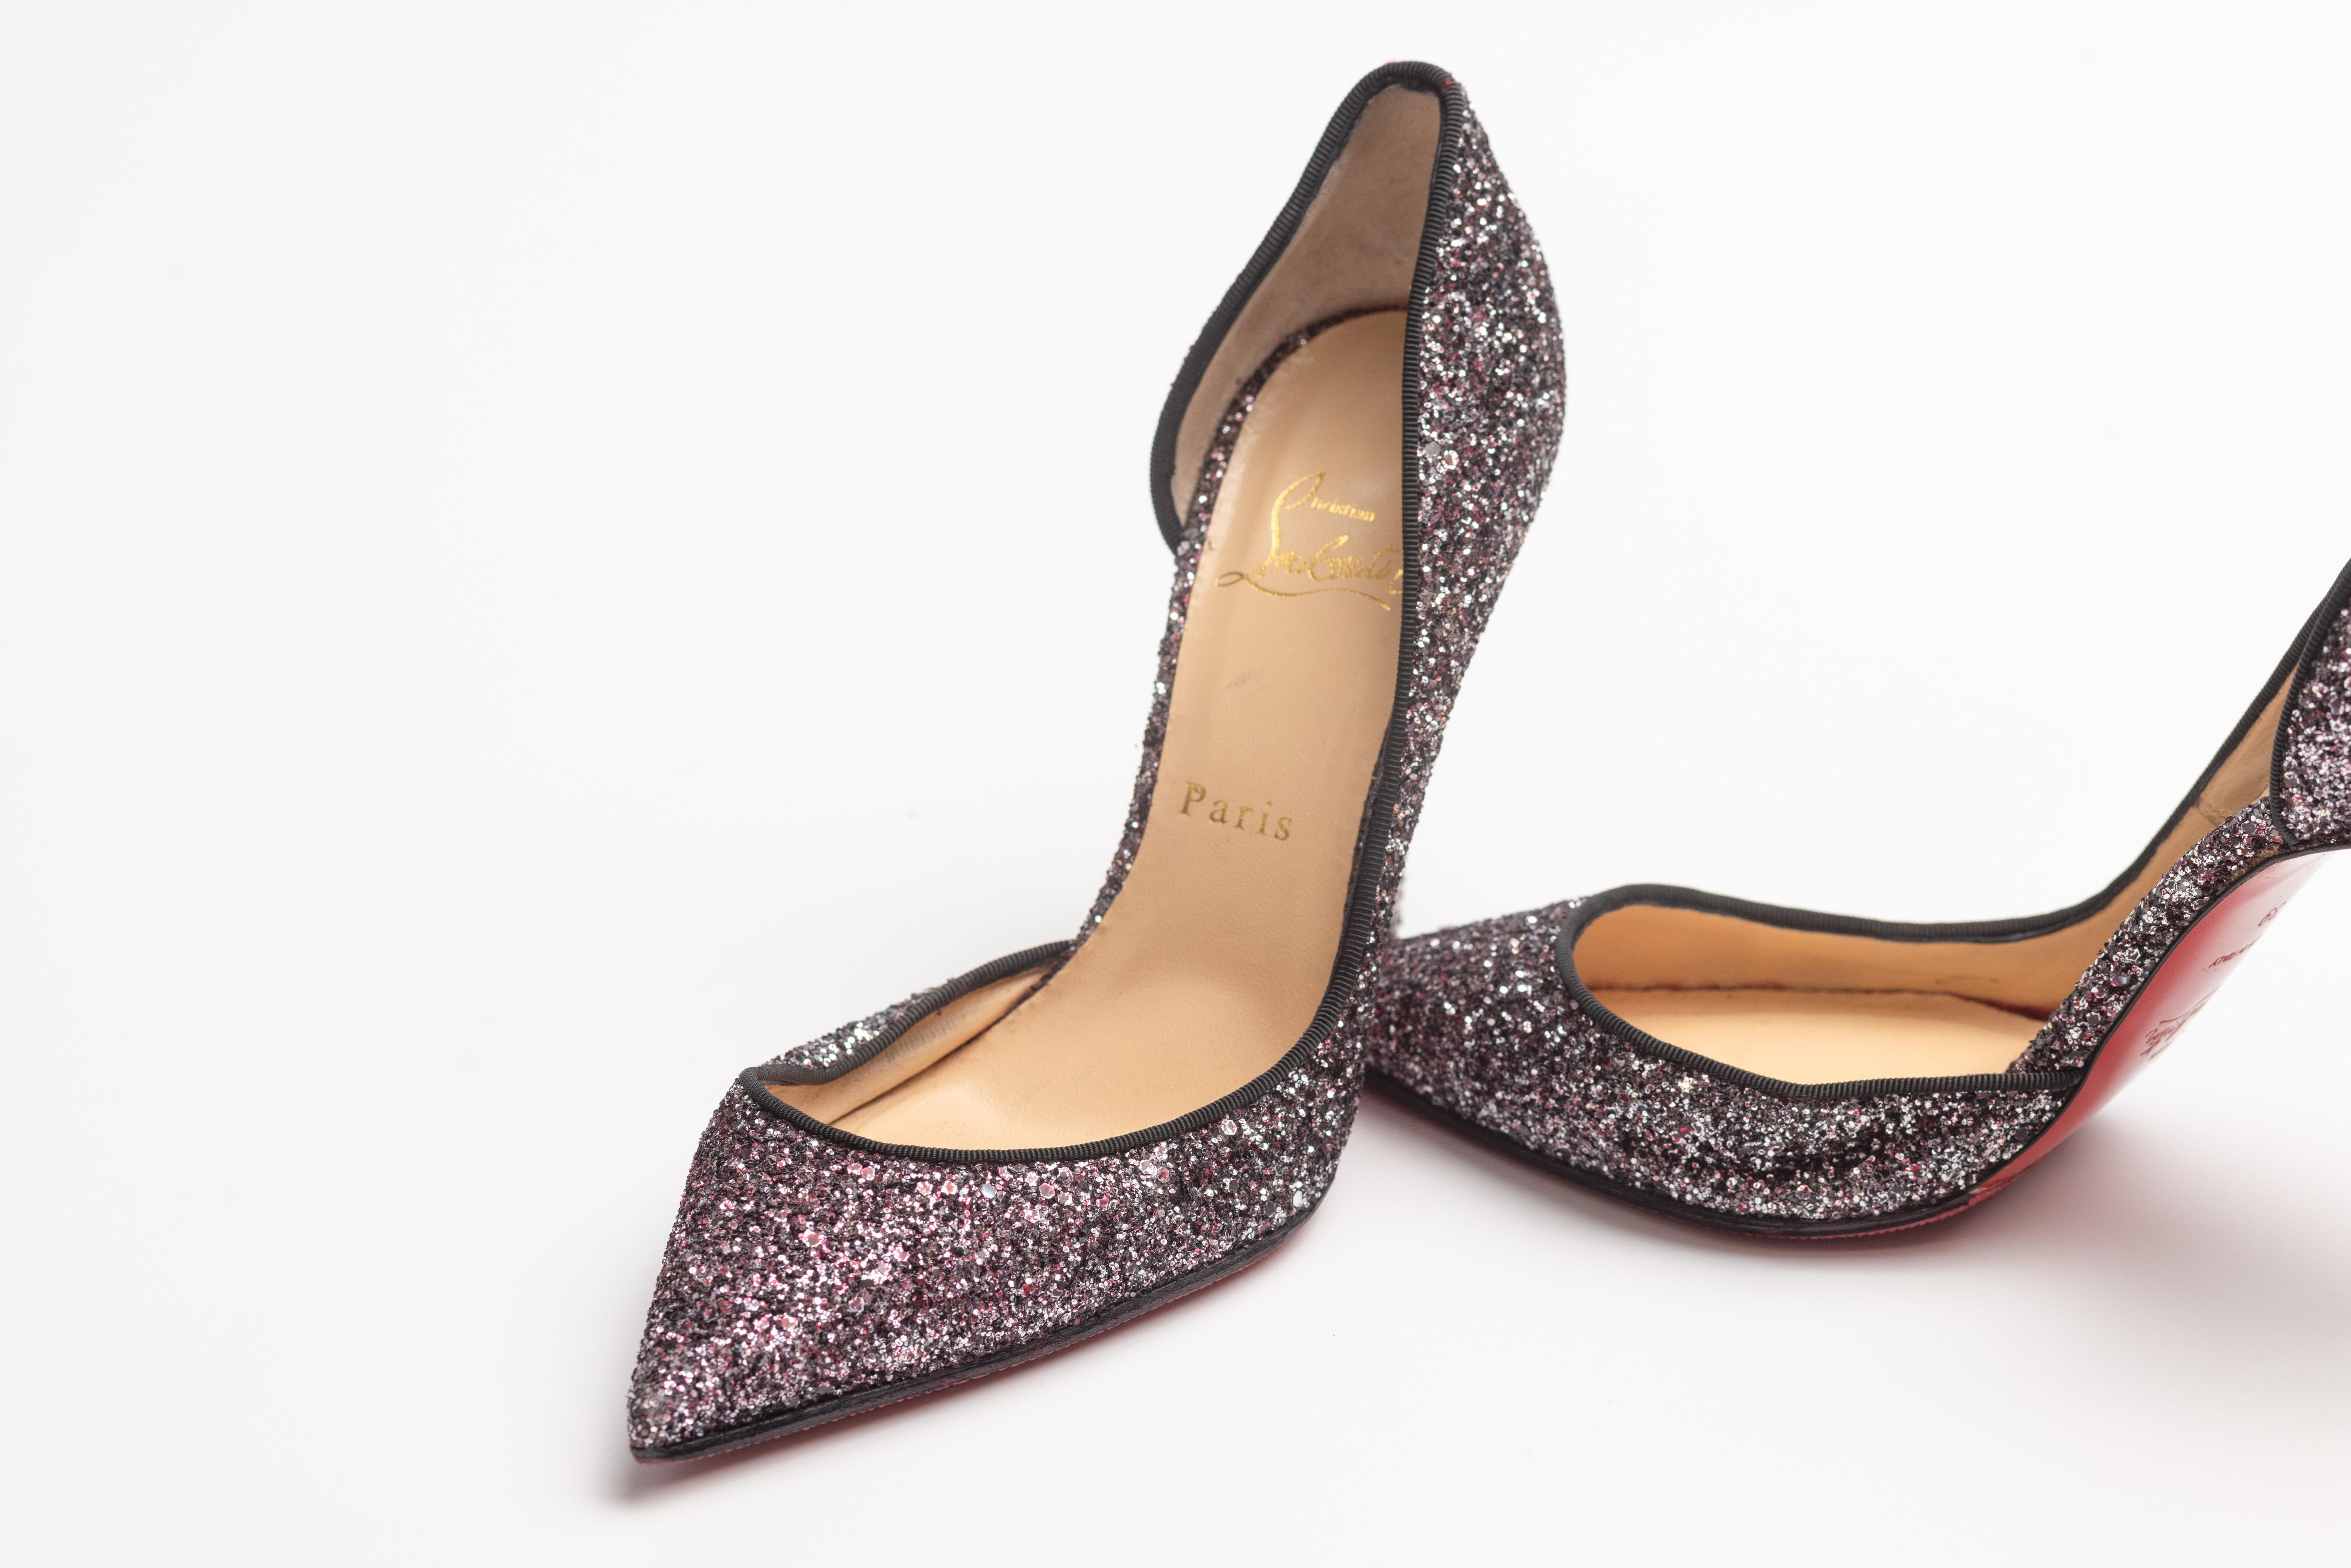 Christian Louboutin Black Glitter Iriza Heels (EU 39) In Good Condition For Sale In Montreal, Quebec